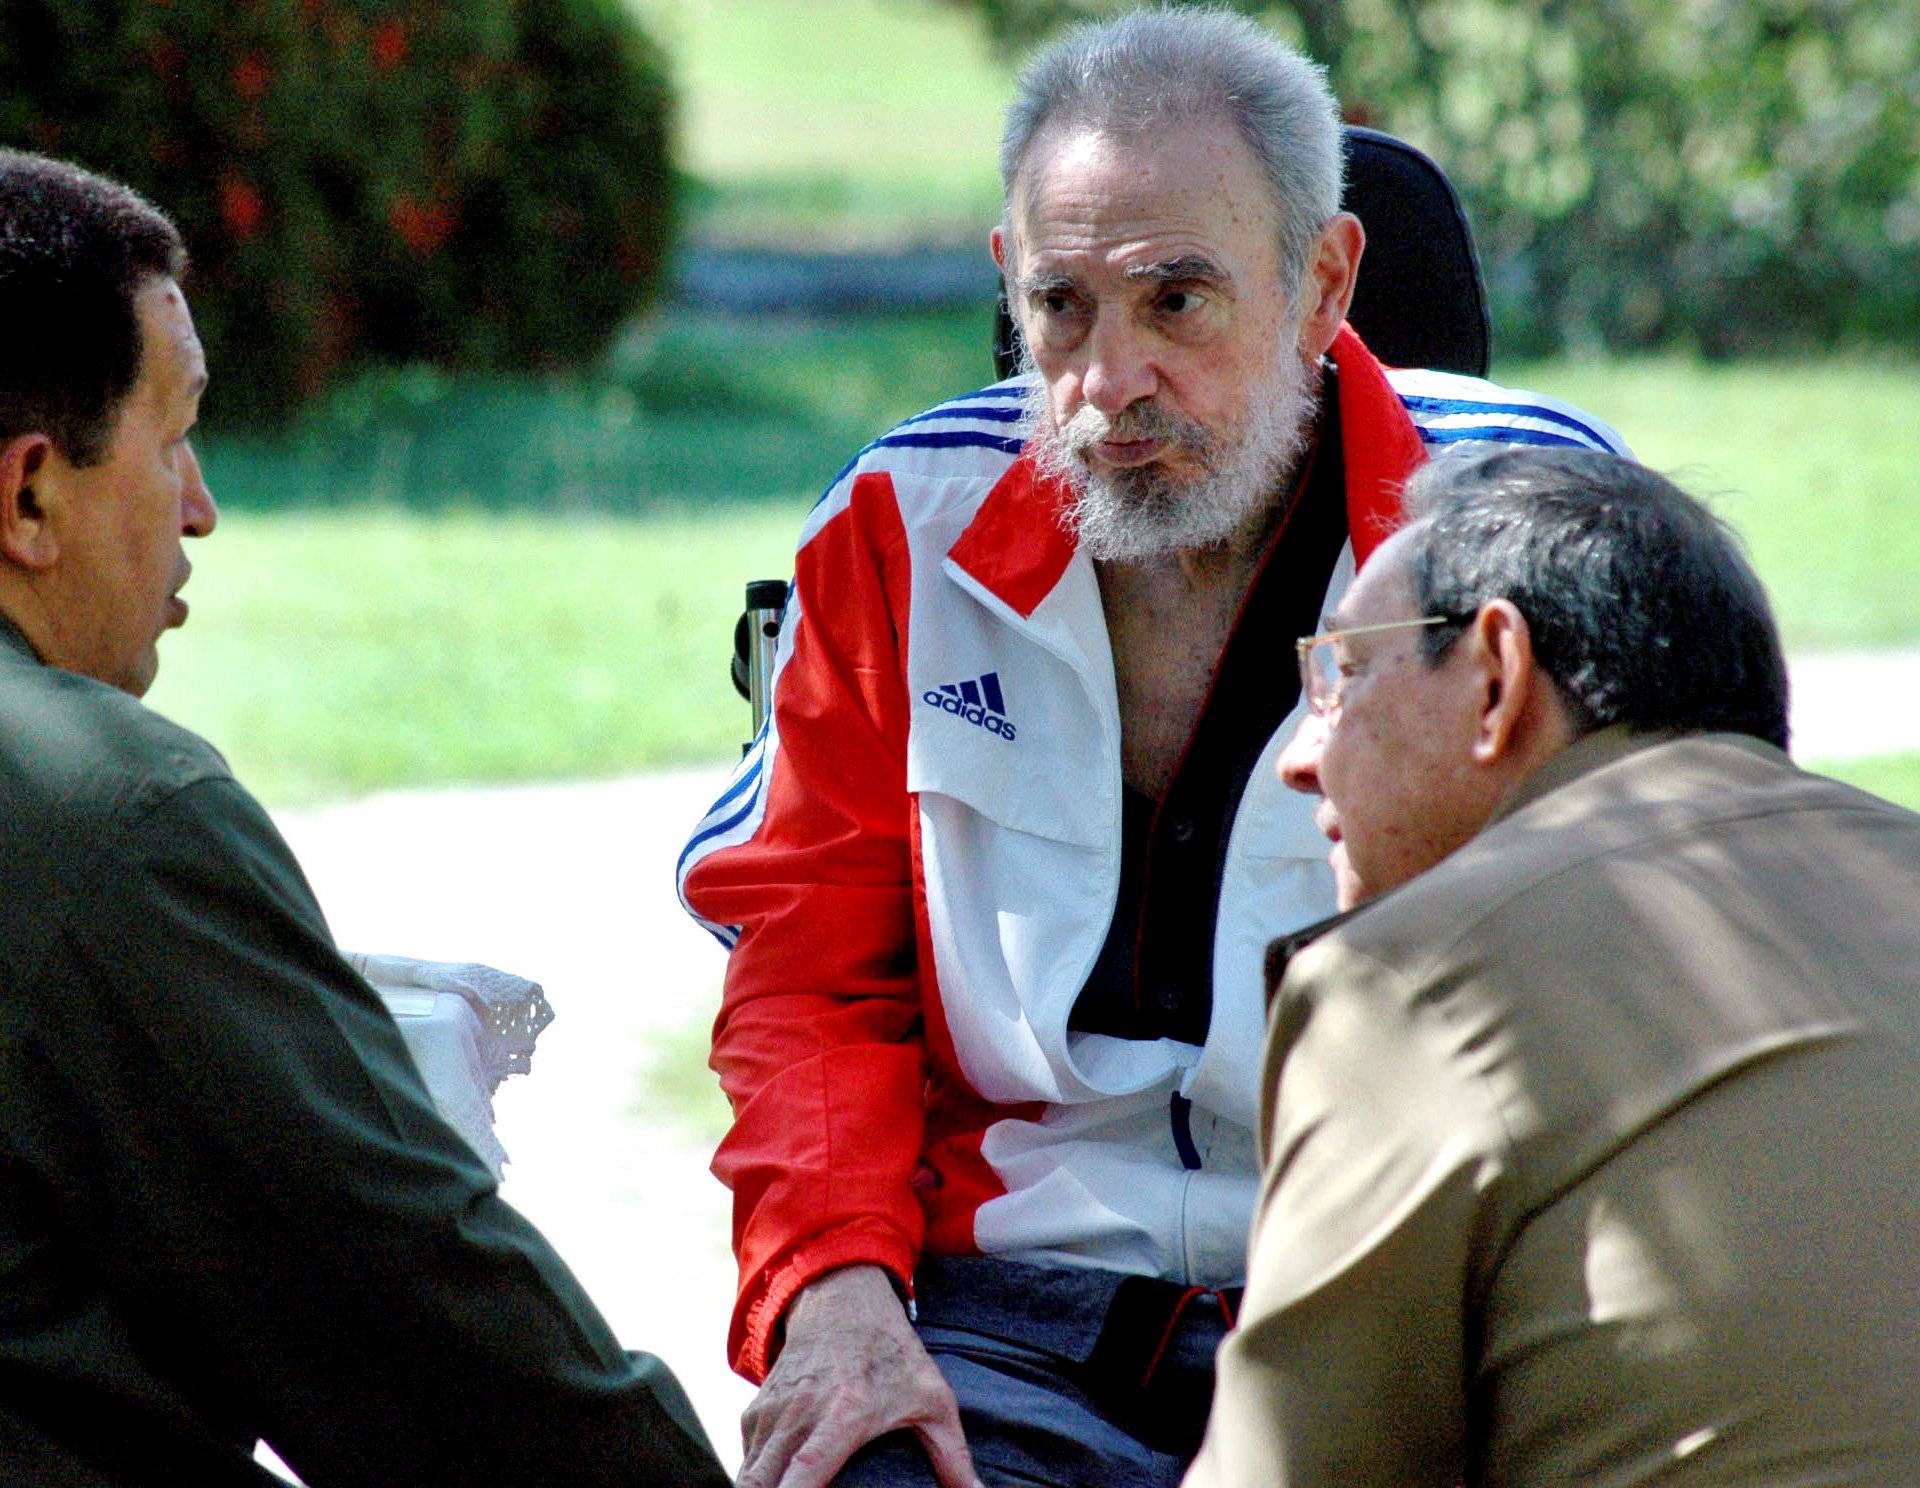 File photo of former Cuban President Fidel Castro listening during a meeting with his brother Cuban President Raul Castro and Venezuela's President Hugo Chavez in Havana